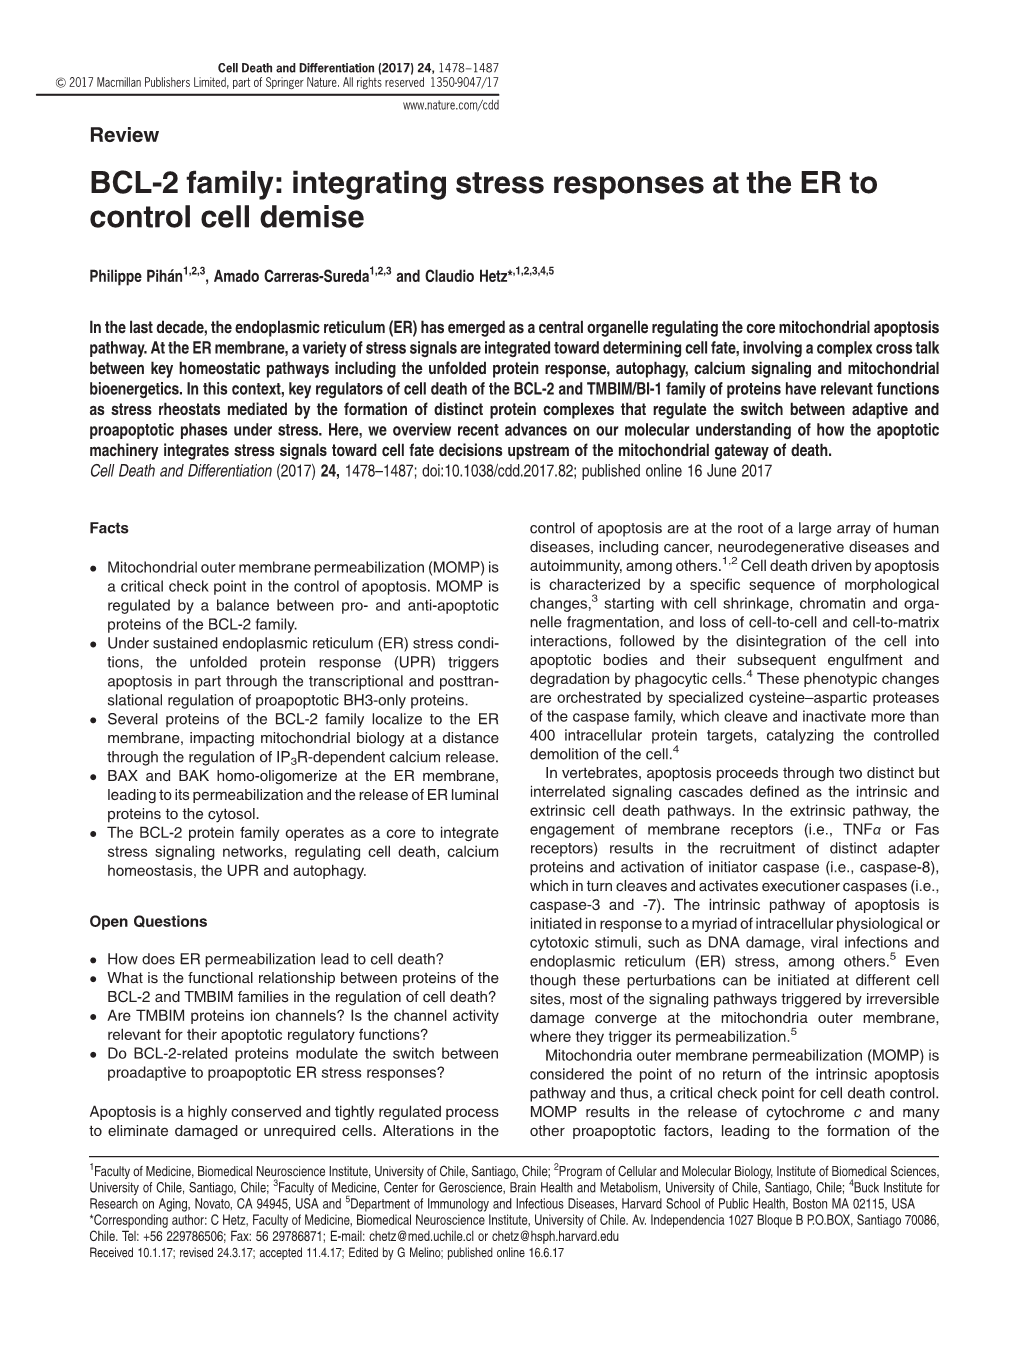 BCL-2 Family: Integrating Stress Responses at the ER to Control Cell Demise